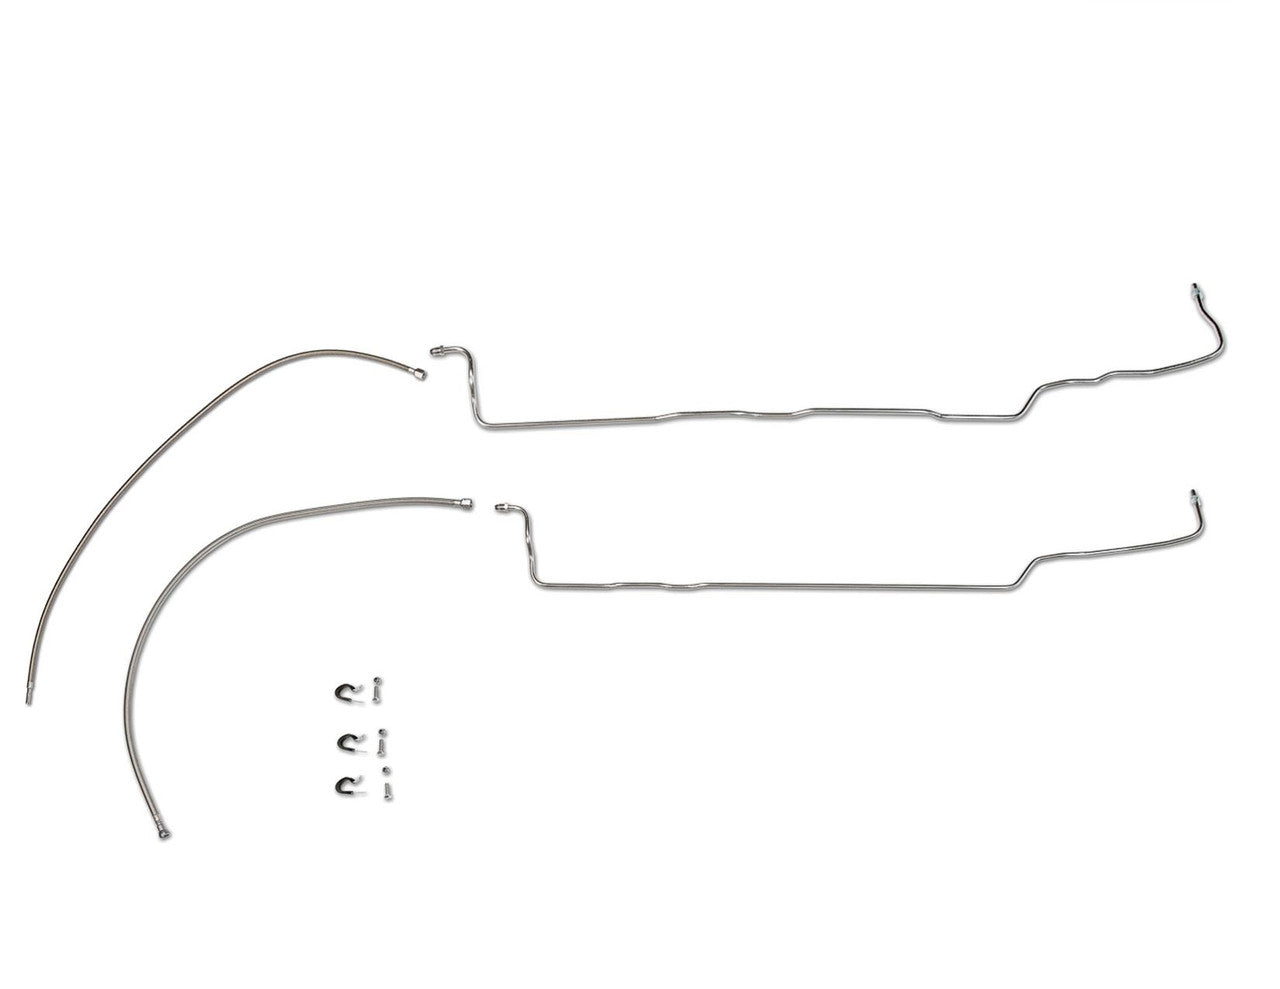 Chevy Silverado Fuel Line Set 2004 C/K2500 Ext Cab 6.5 ft Bed 6.0L SS888-Q3 Stainless Steel